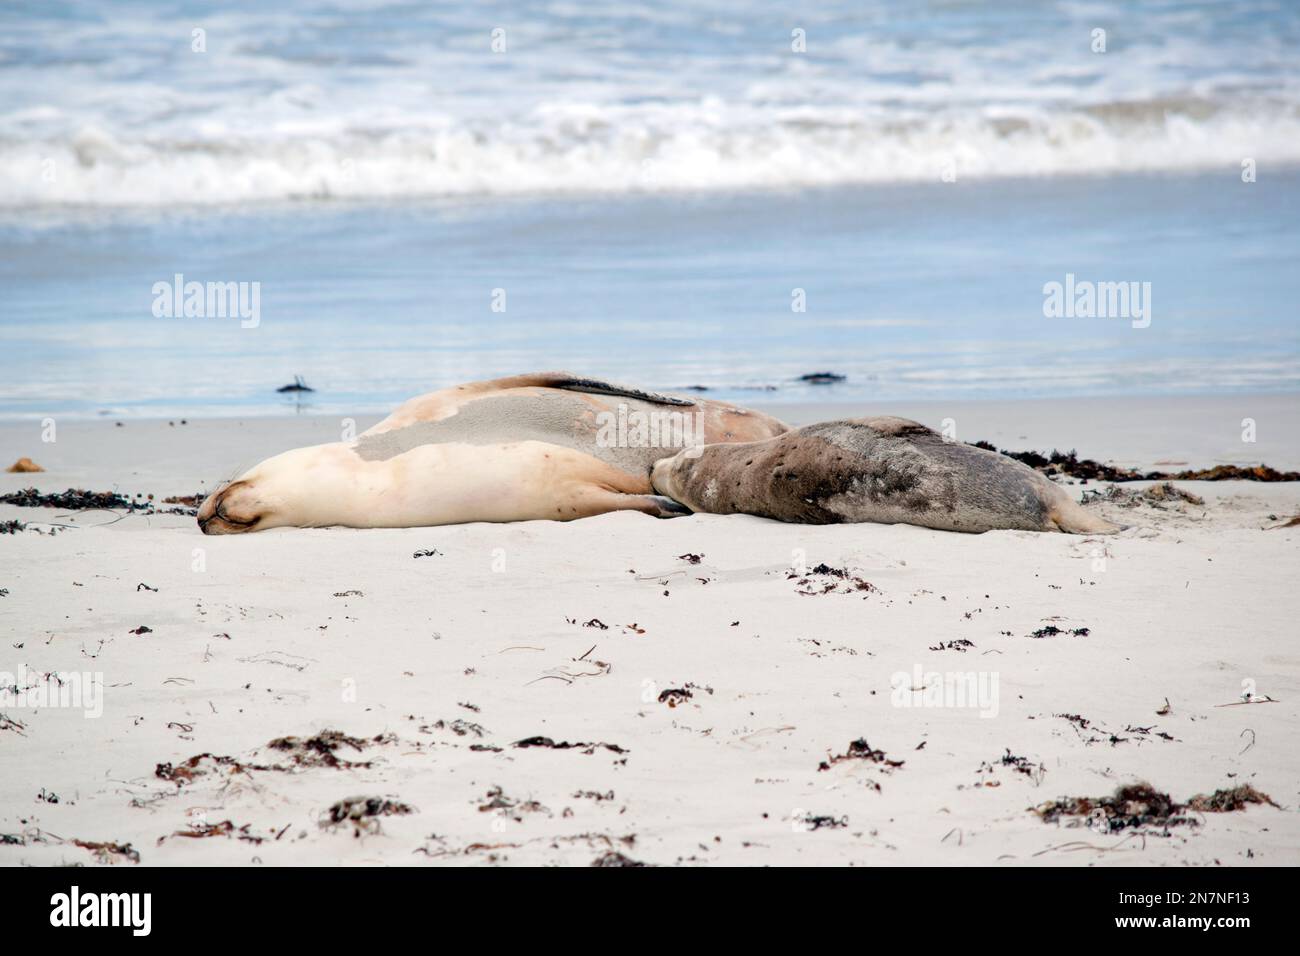 the sea lion is feeding her pup after returning from the ocean Stock Photo